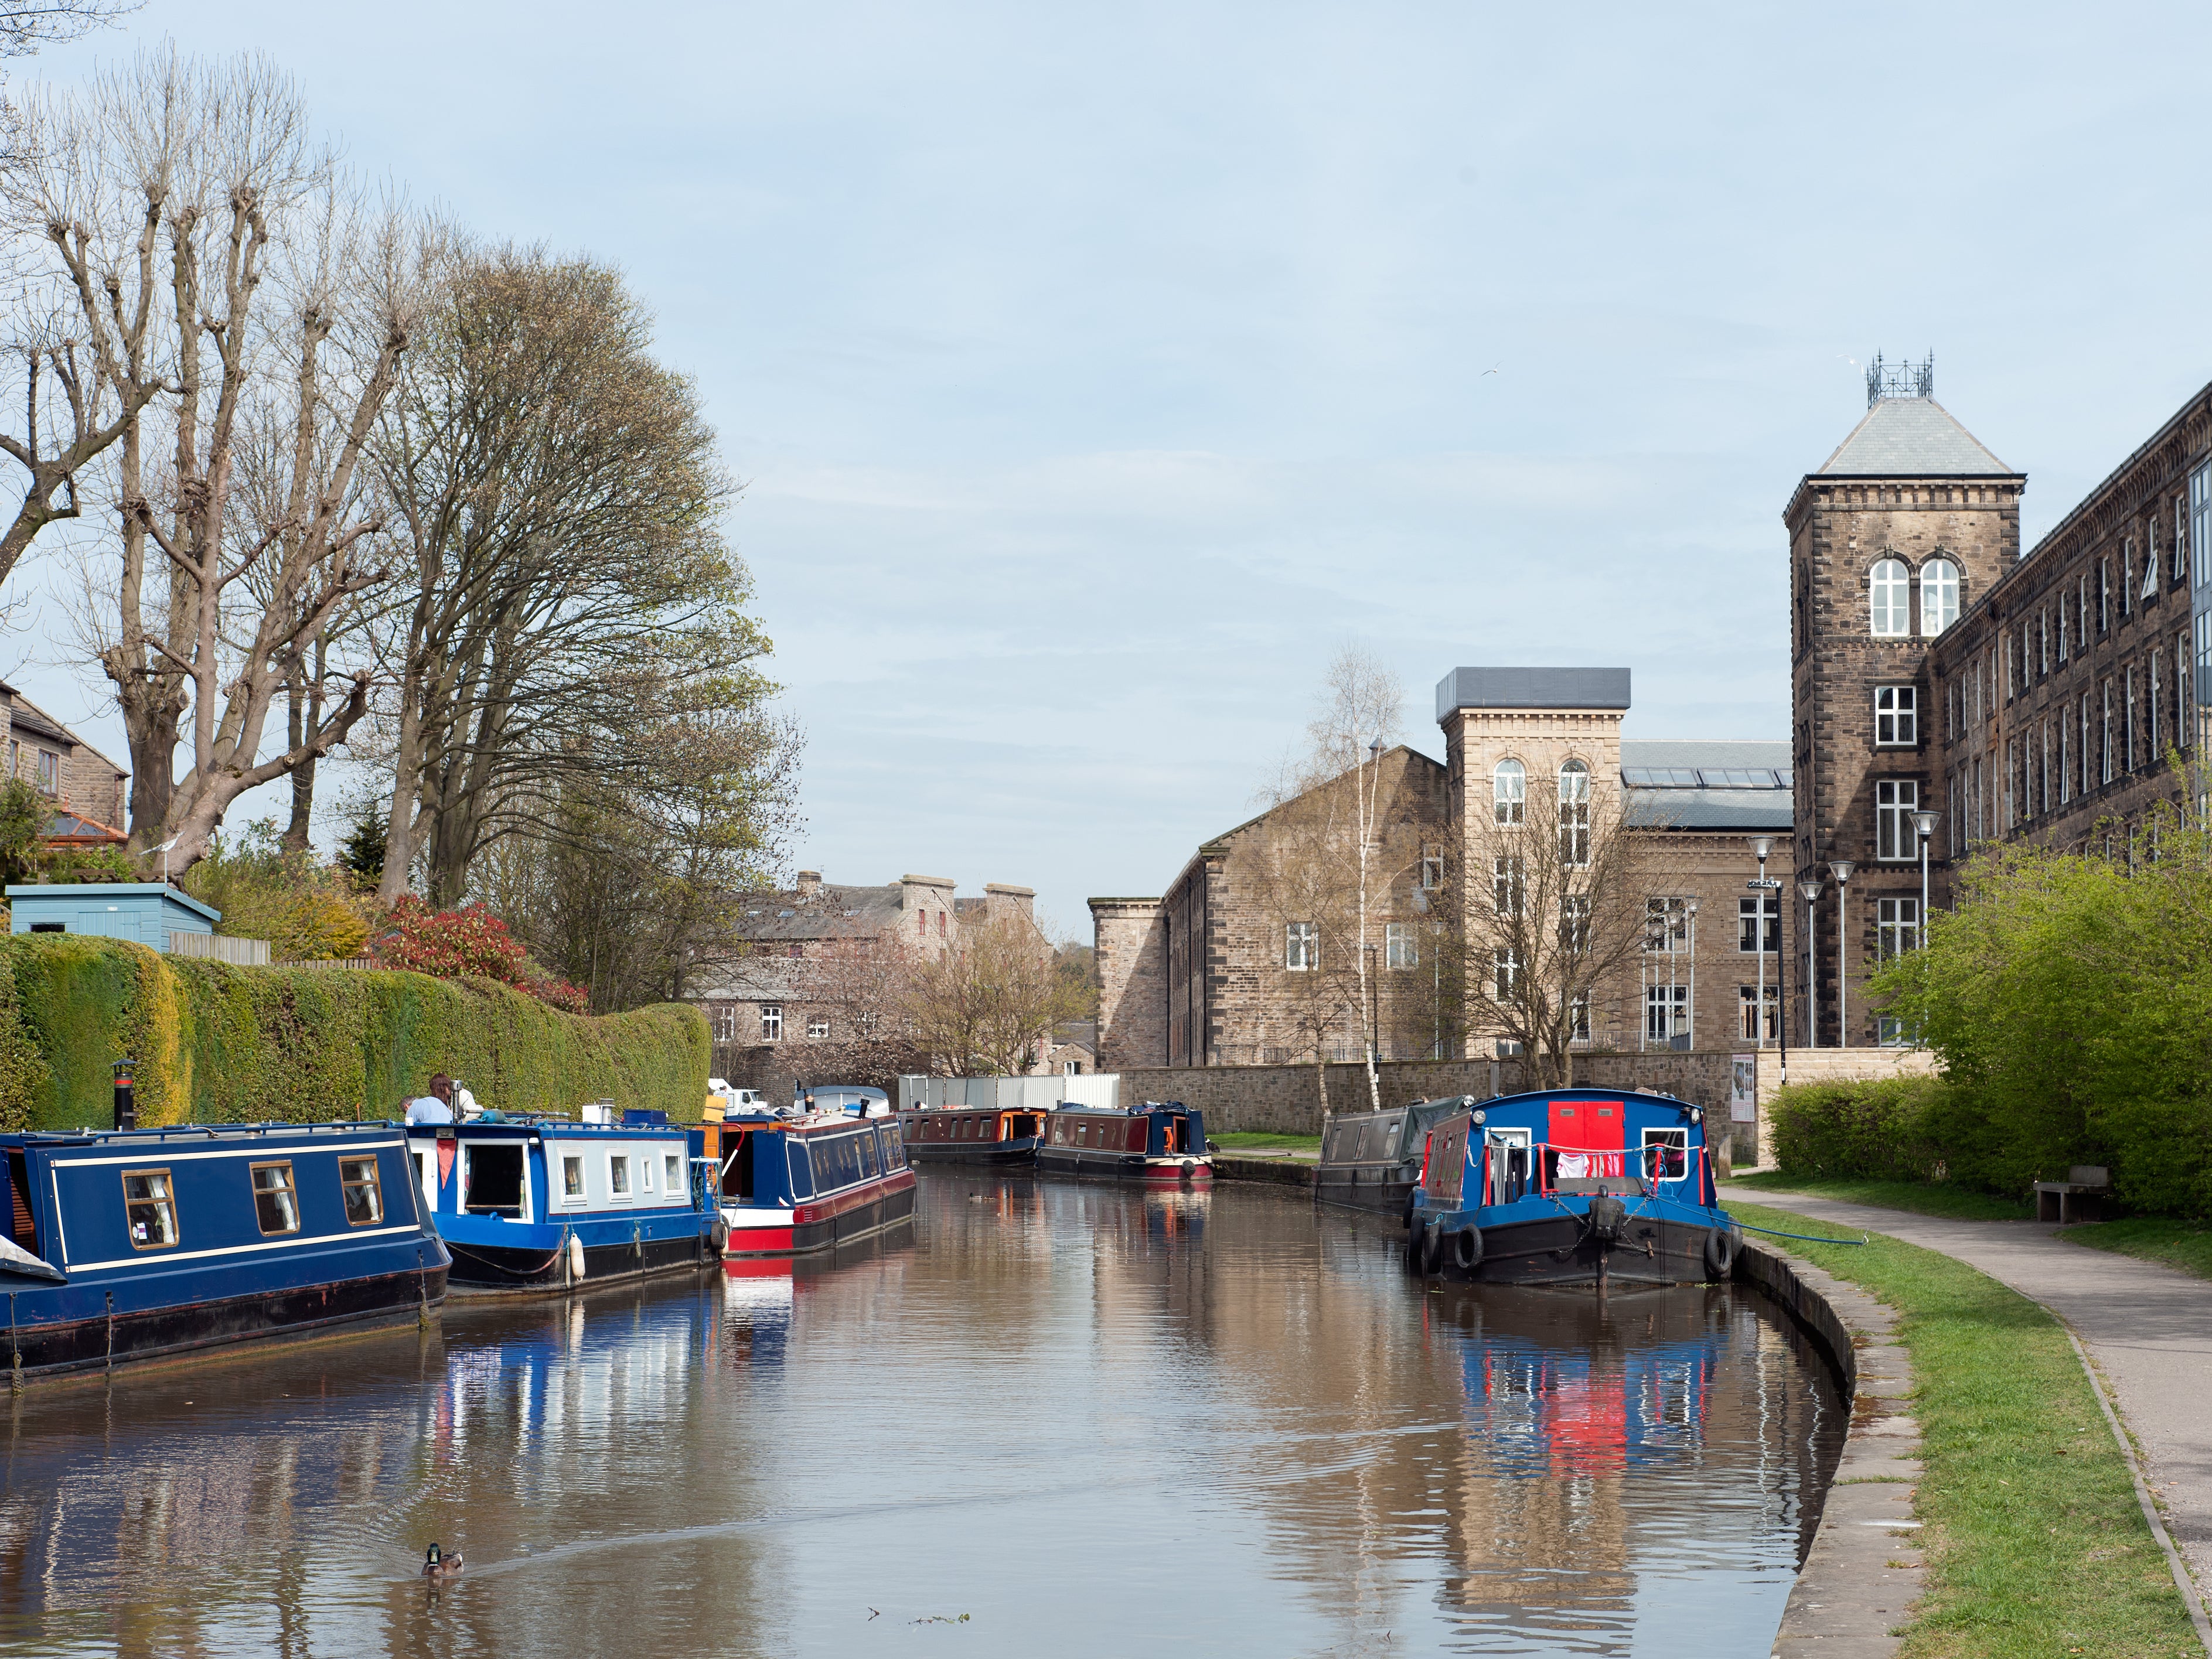 Boats could become stuck on parts of the UK’s longest canal amid water shortages